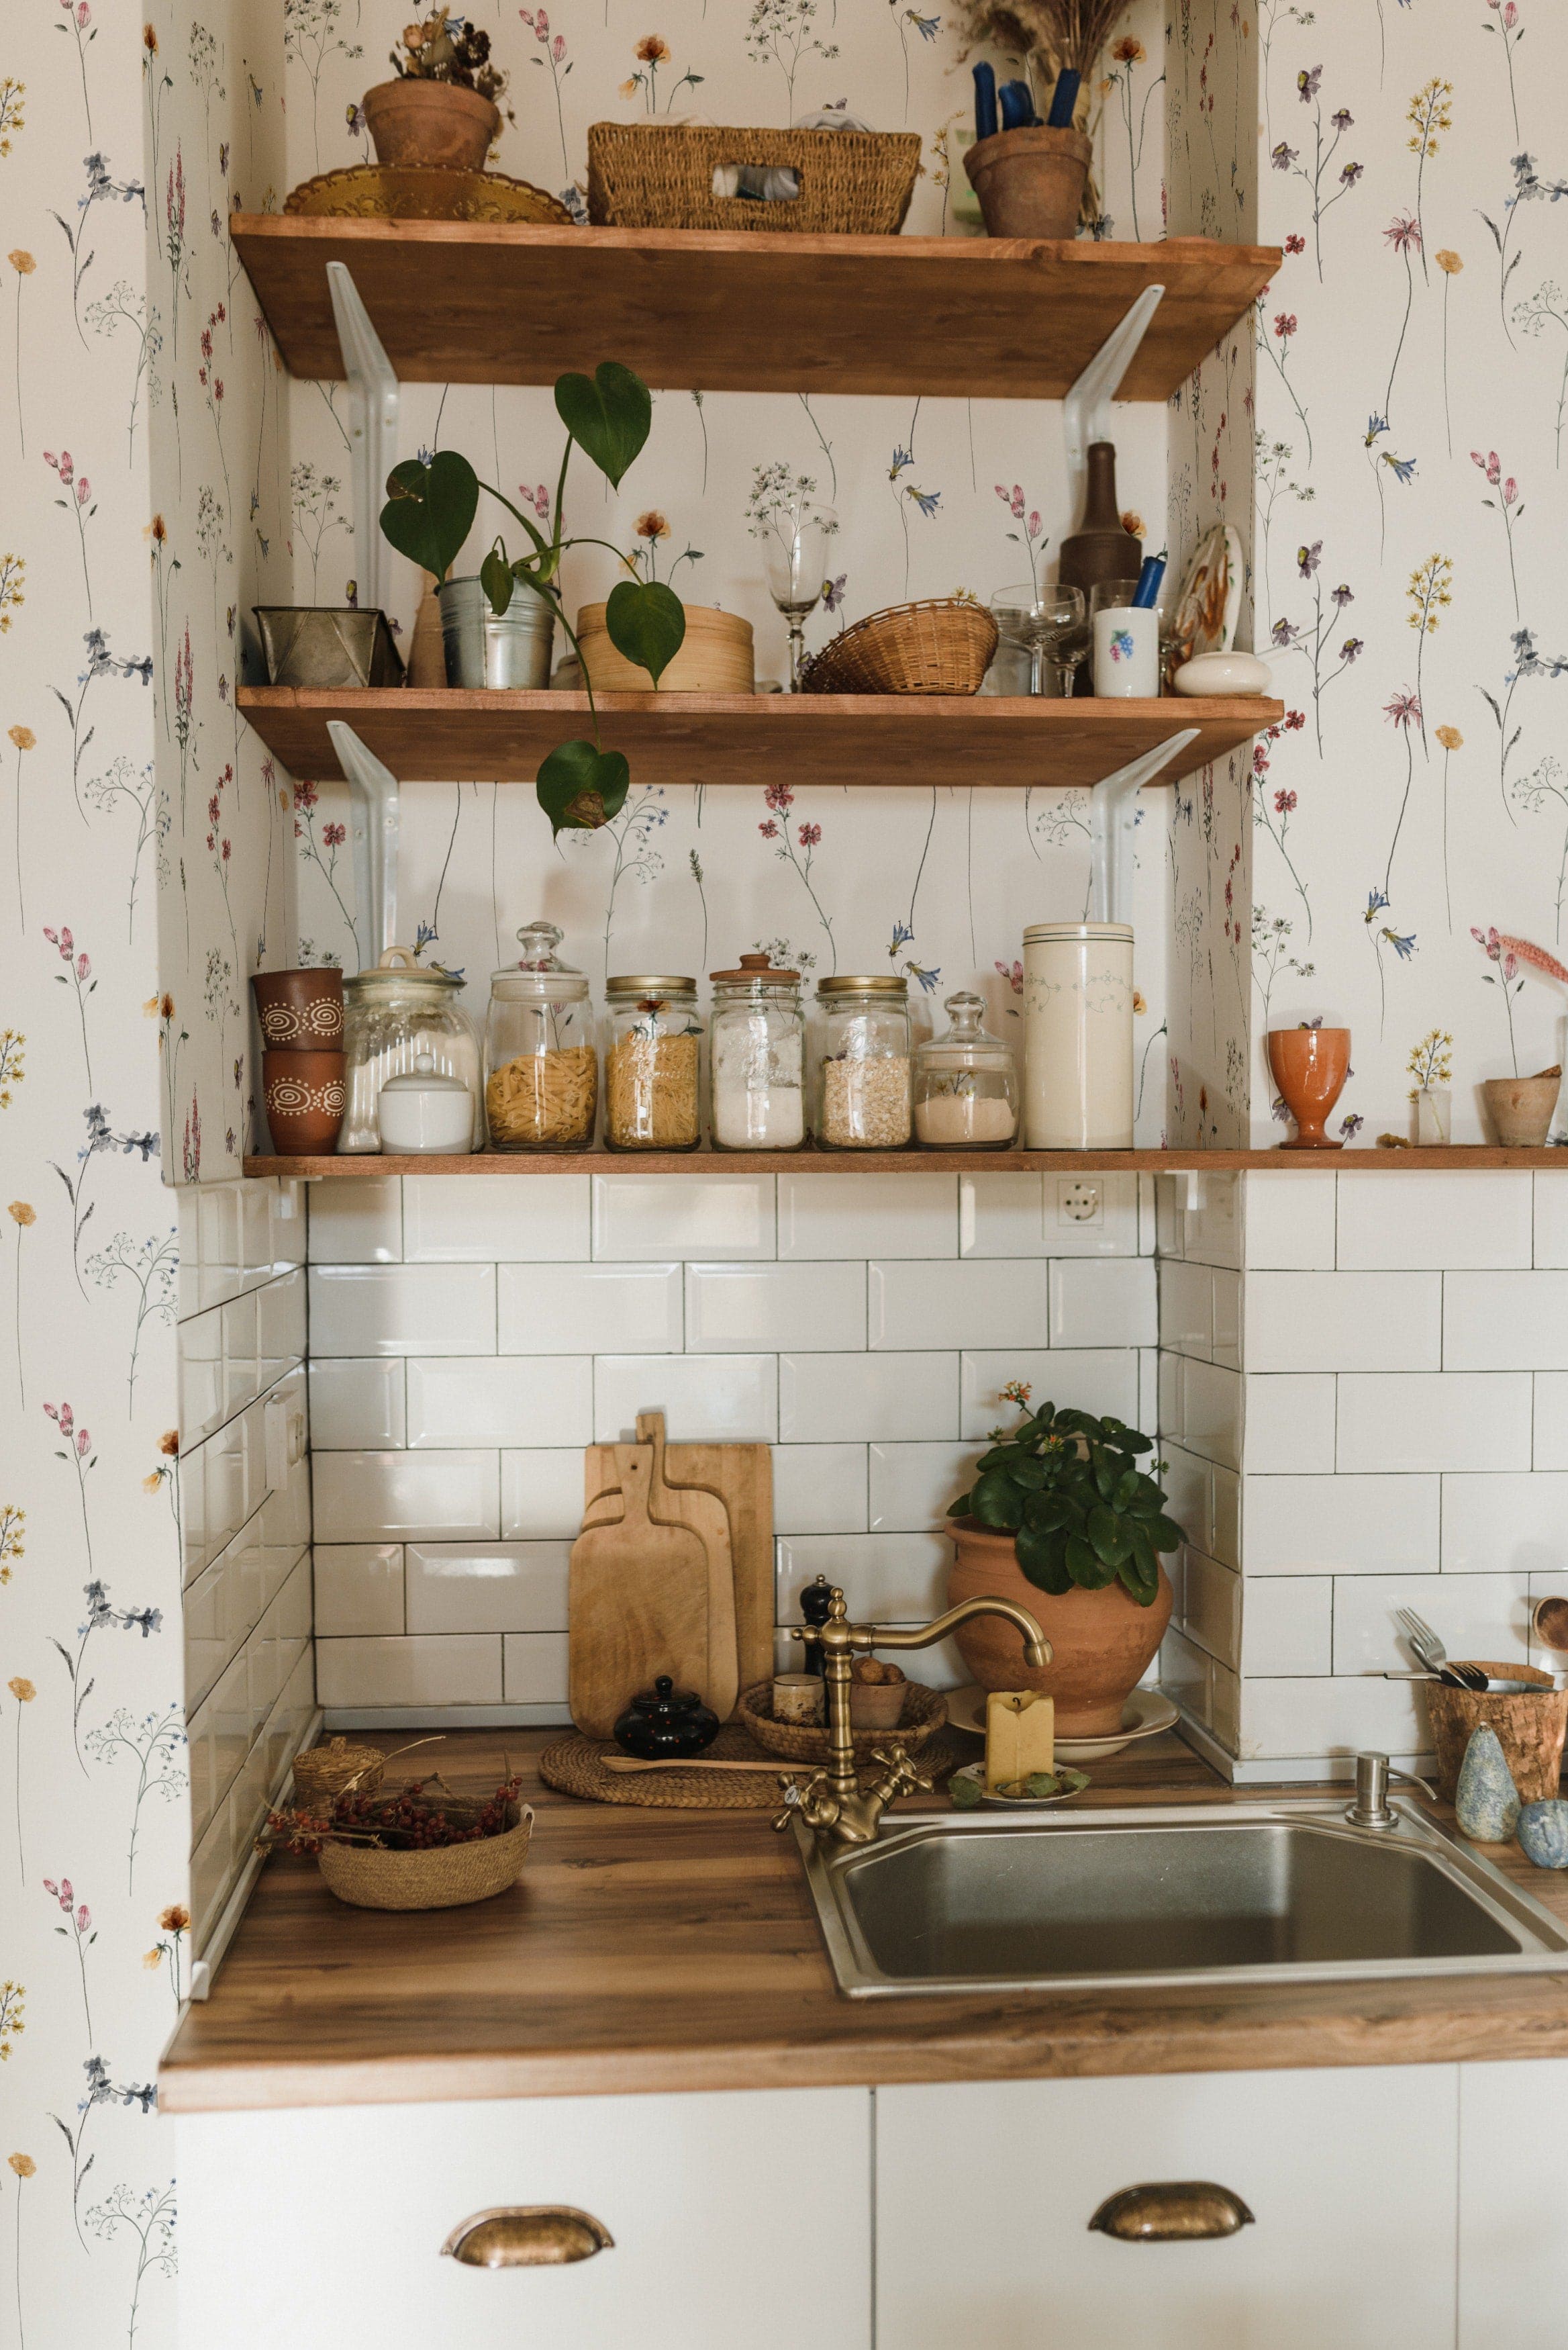 Rustic kitchen with Dainty Botanicals wallpaper enhancing a cozy corner filled with wooden shelves, assorted jars, and green houseplants against a backdrop of floral and botanical illustrations